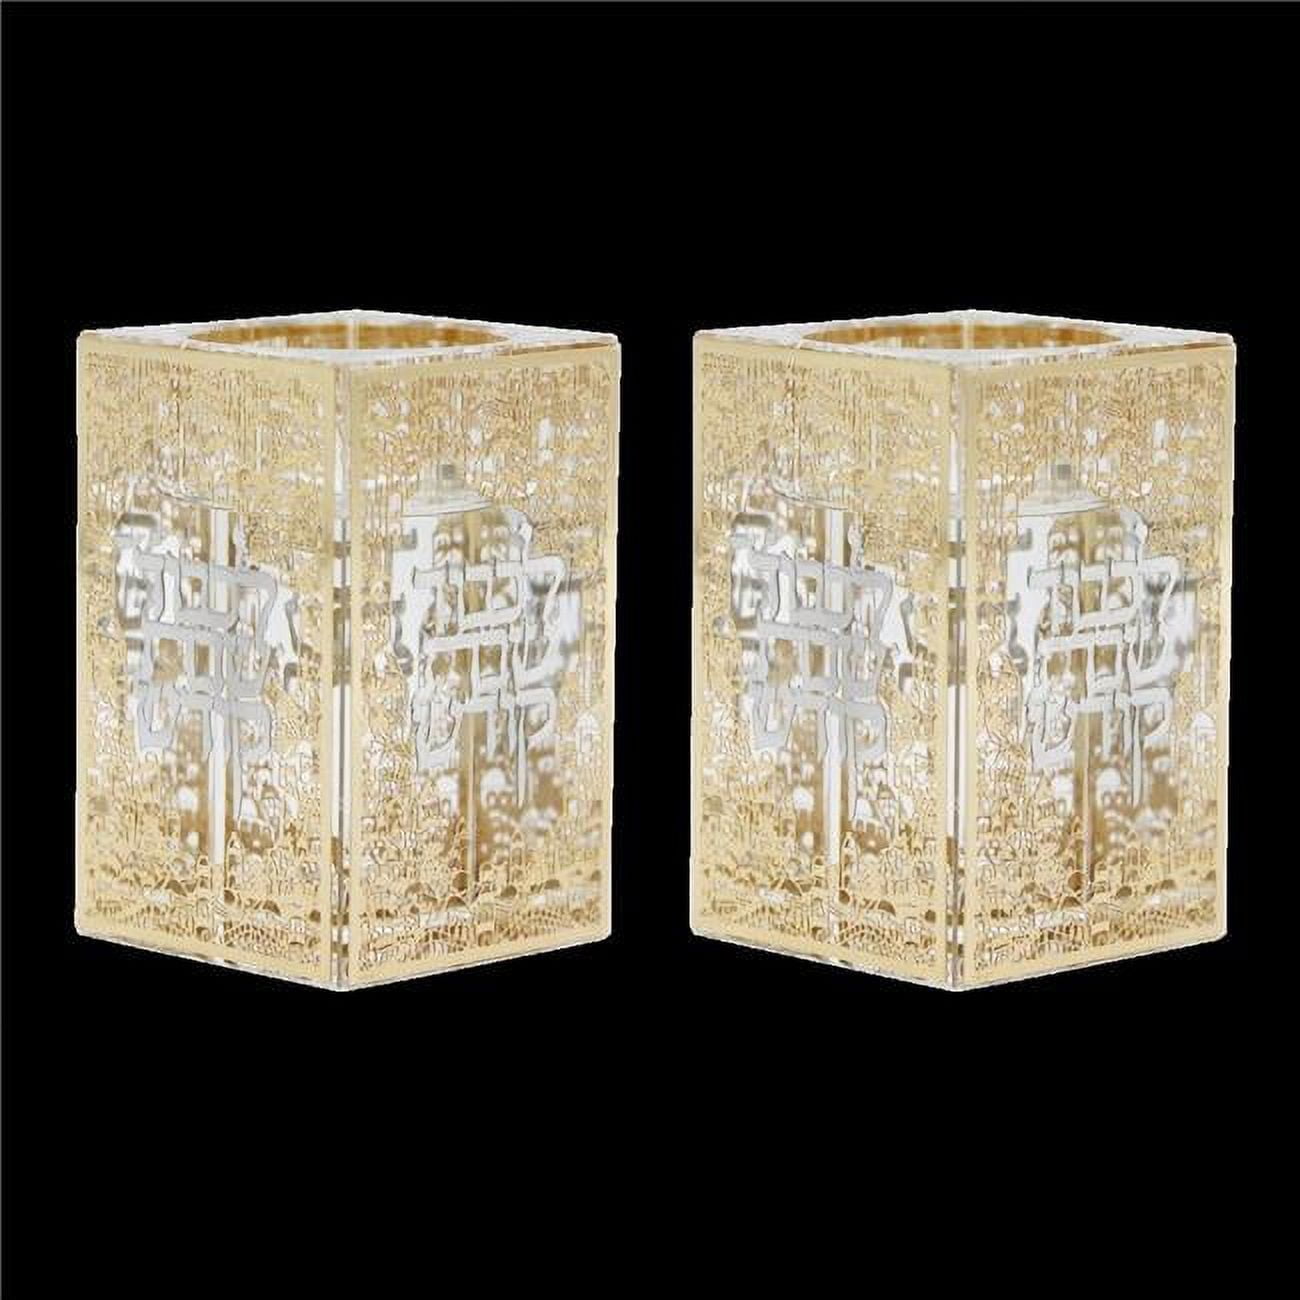 Picture of Schonfeld Collection 160177 3 x 2 x 2 in. Crystal Tea Light Holders with Gold Jerusalem & Silver Shabbat Kodesh